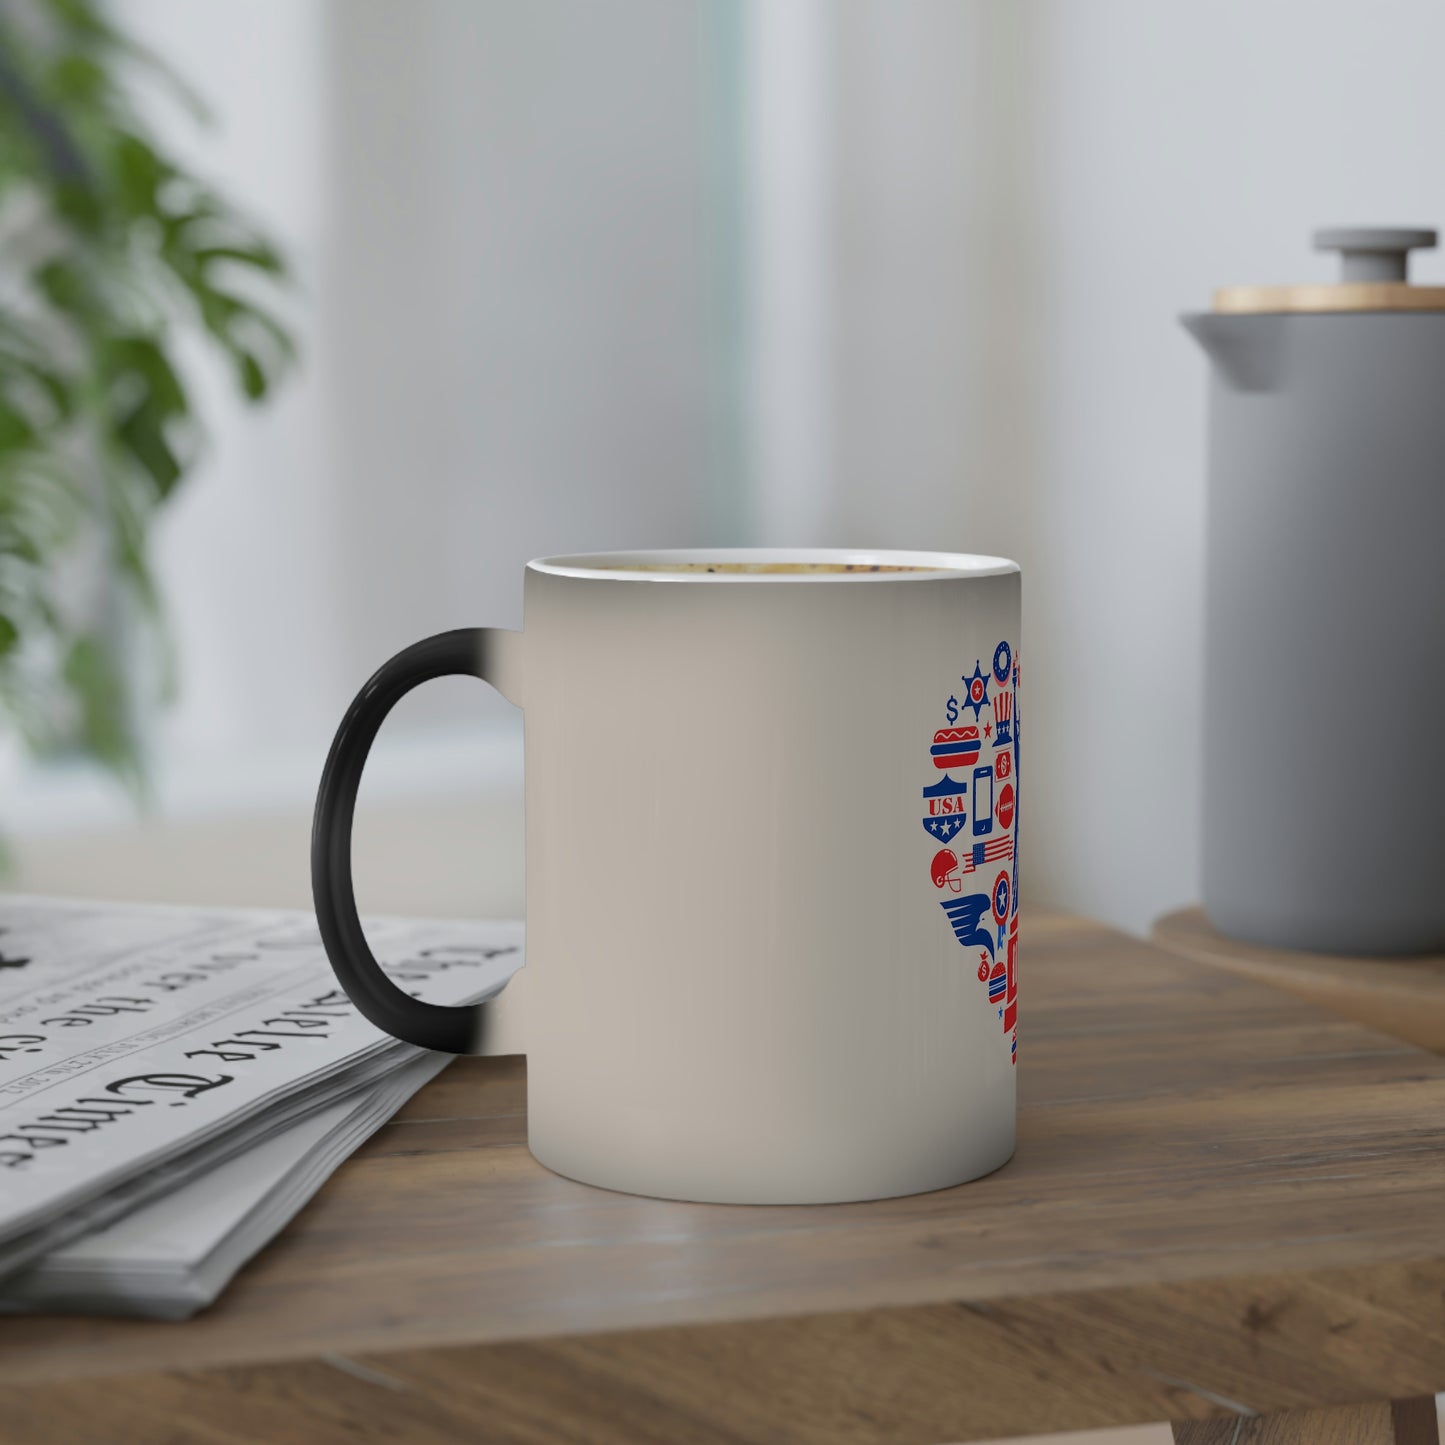 Mug Add Some Fun to Your Morning Coffee Routine with Konaloo's Color-Changing Mug - Perfect for Coffee Addicts and Caffeine Lovers!